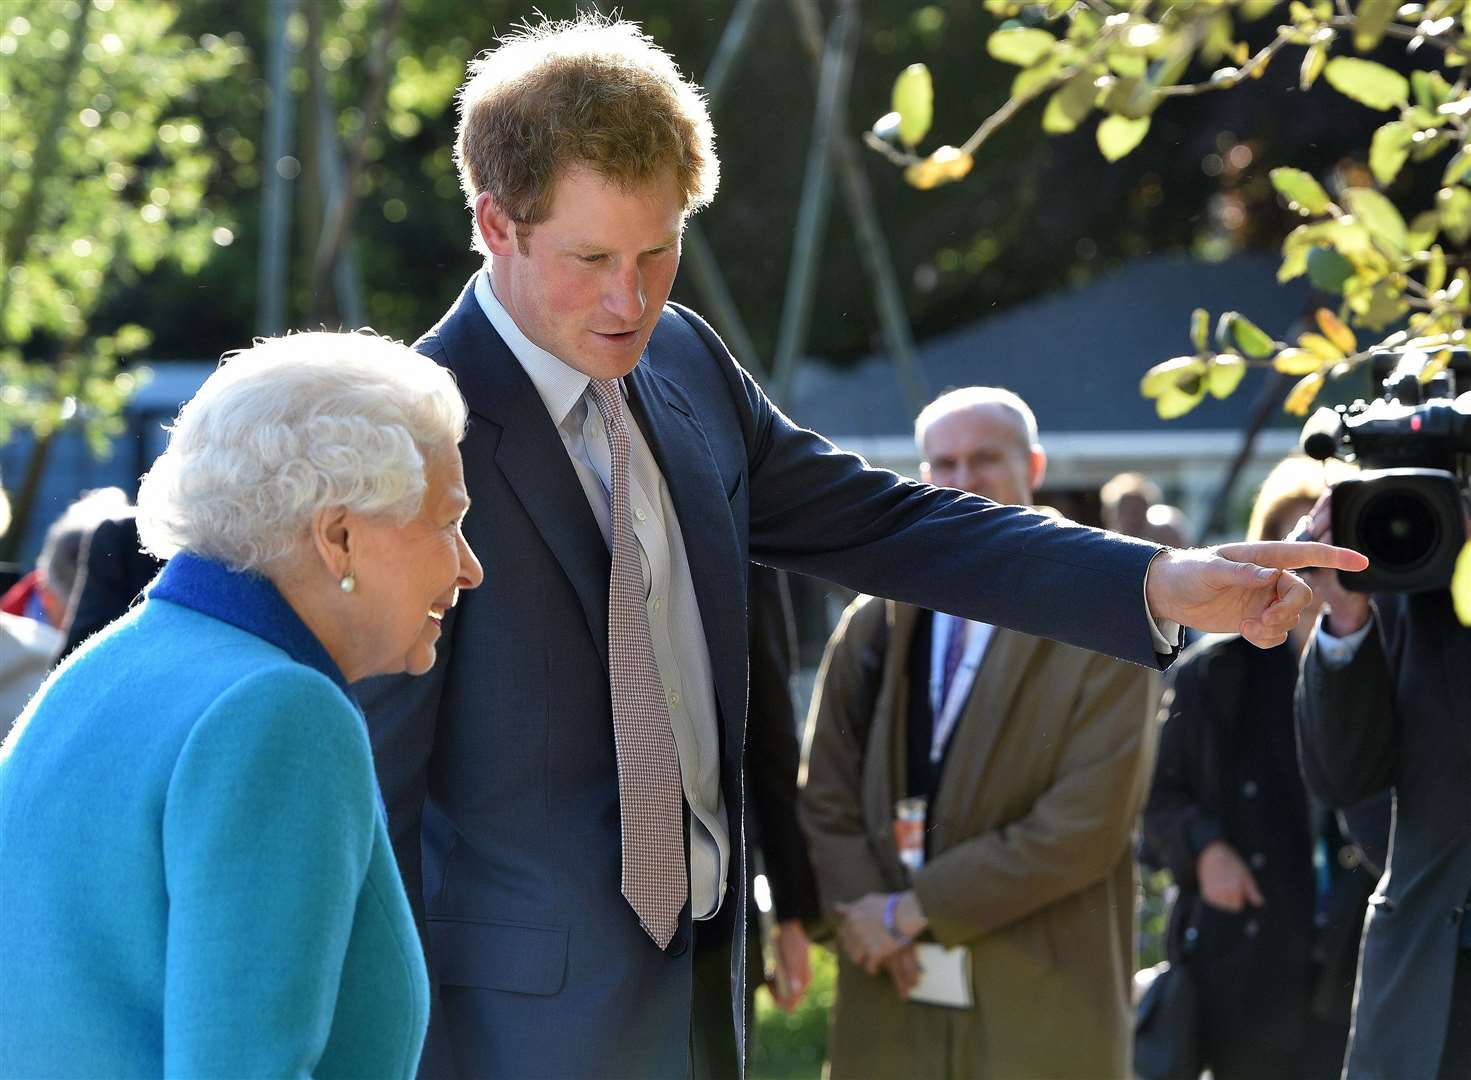 Harry with his grandmother the Queen at the Chelsea Flower Show in 2015 (Julian Simmonds/The Daily Telegraph/PA)